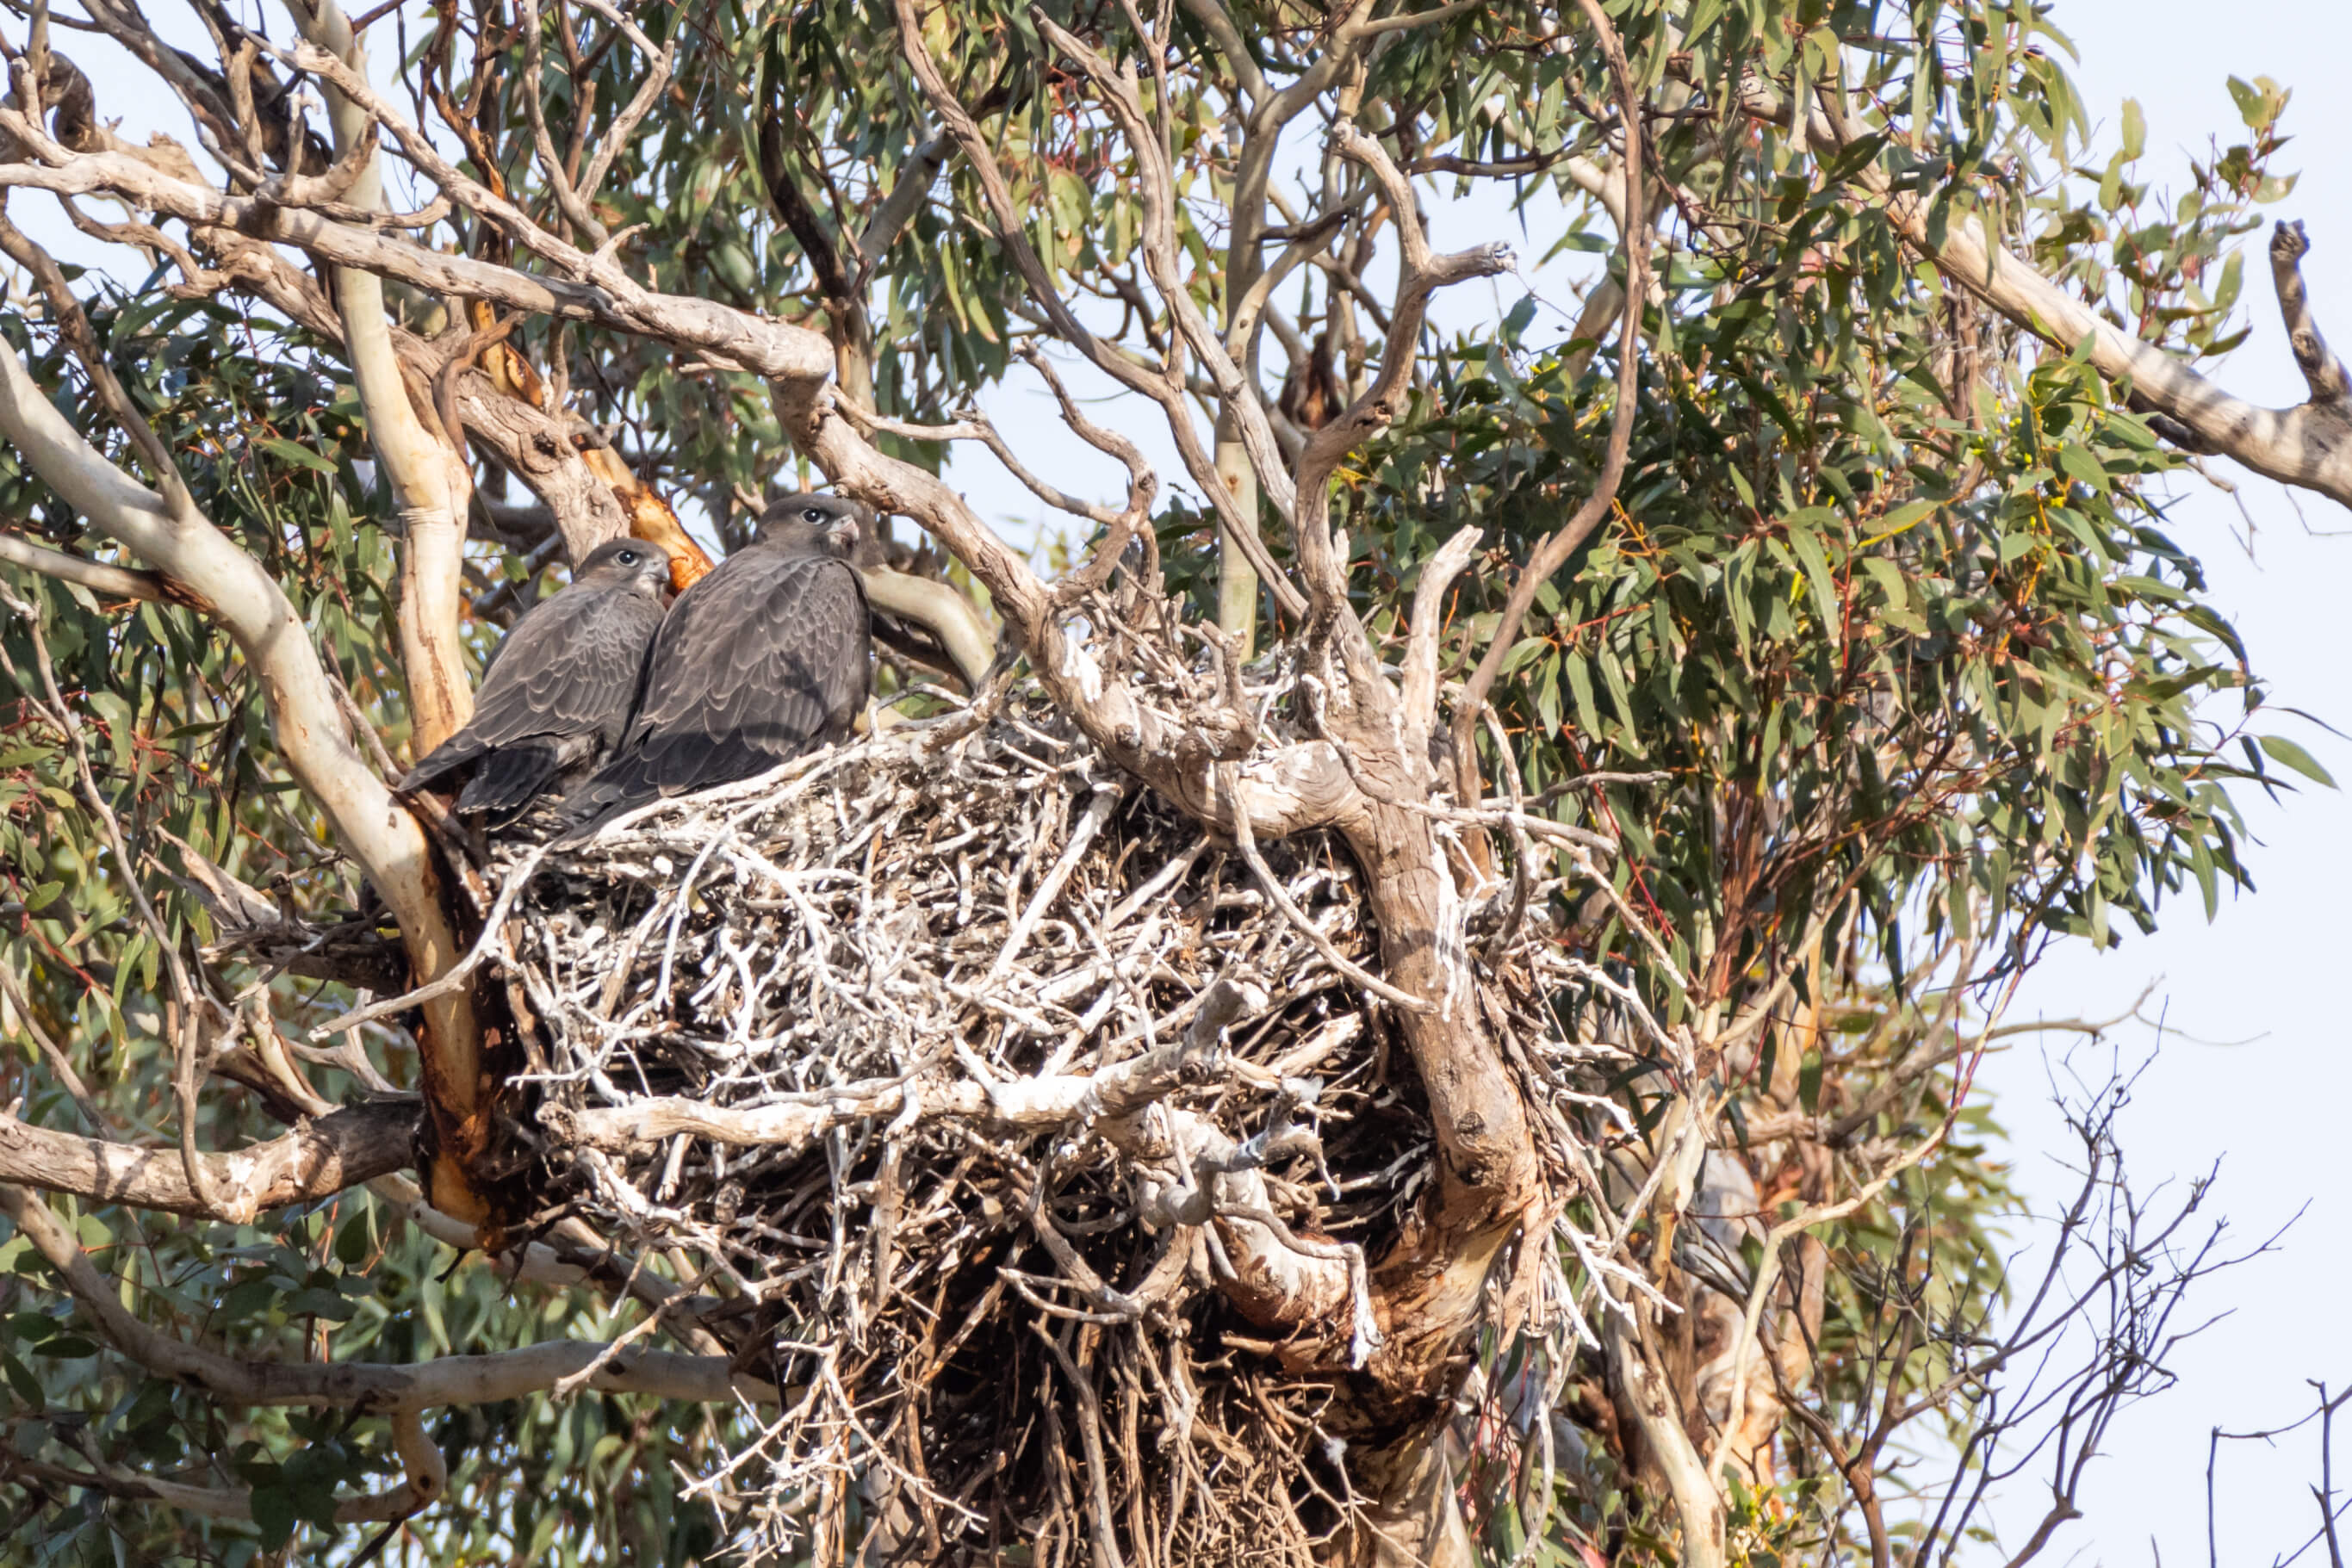 Family of Black Falcons in a nest in a tree